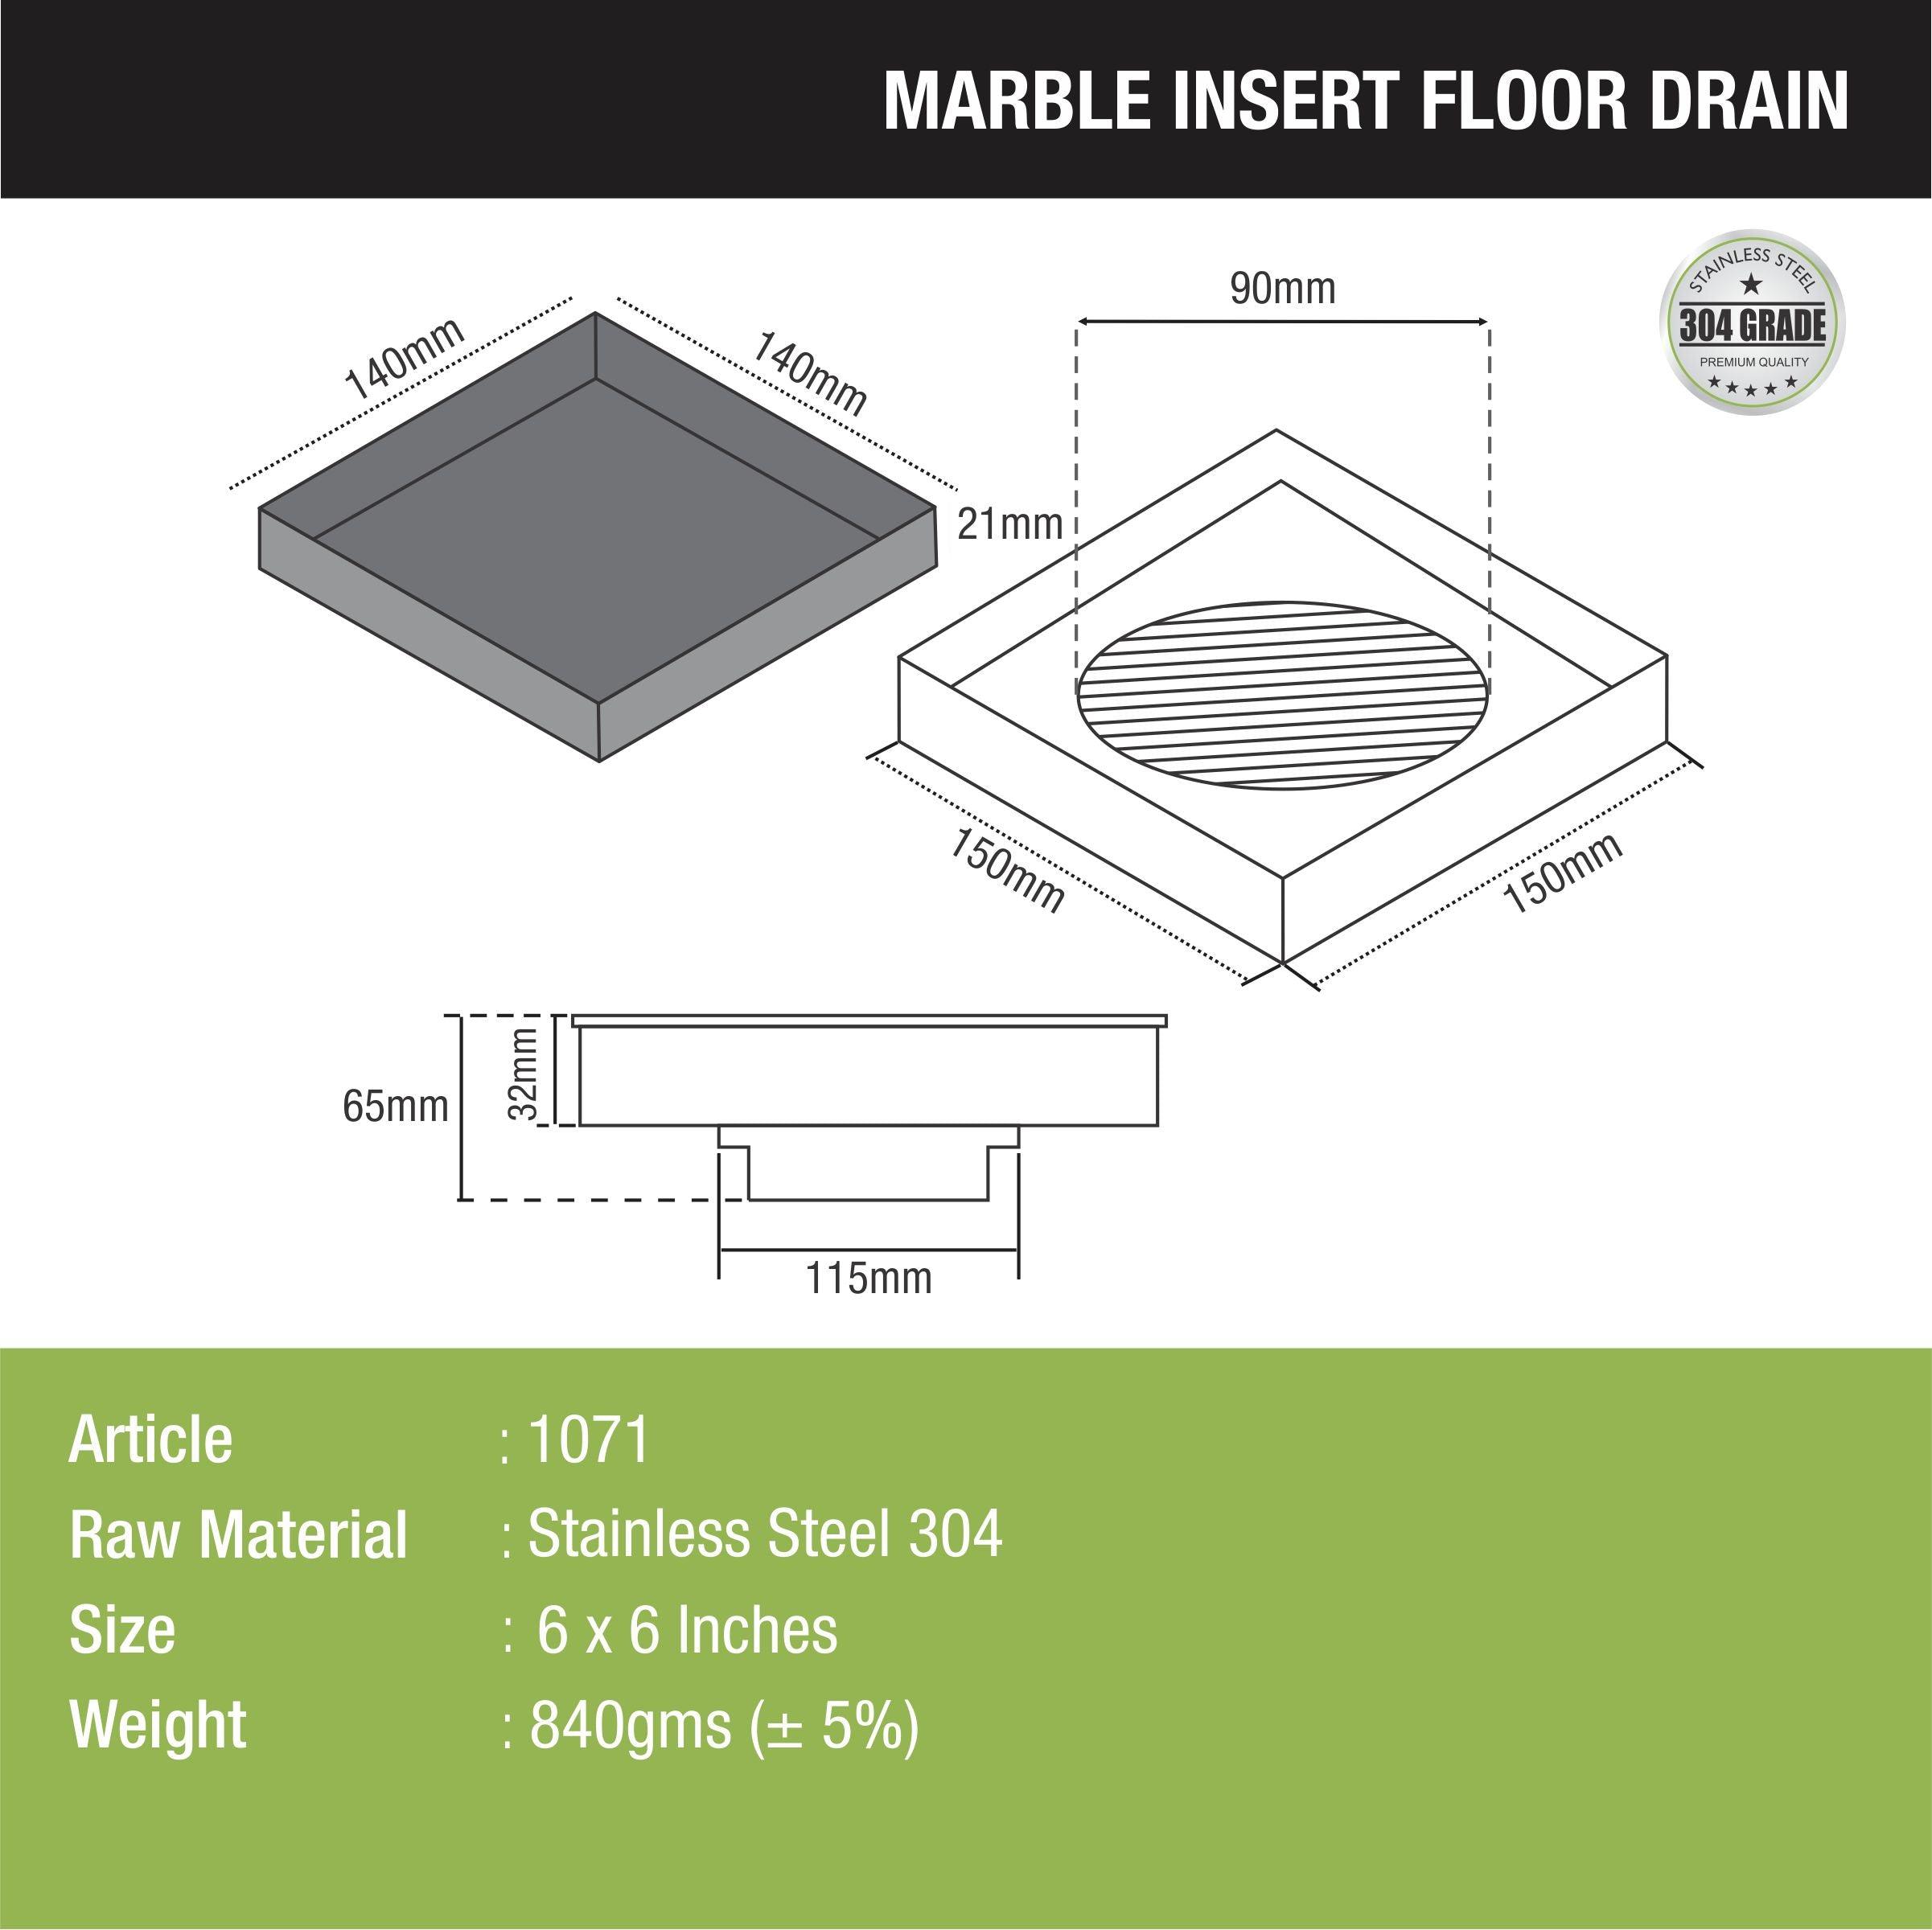 Marble Insert Floor Drain (6 x 6 Inches) dimensions and sizes